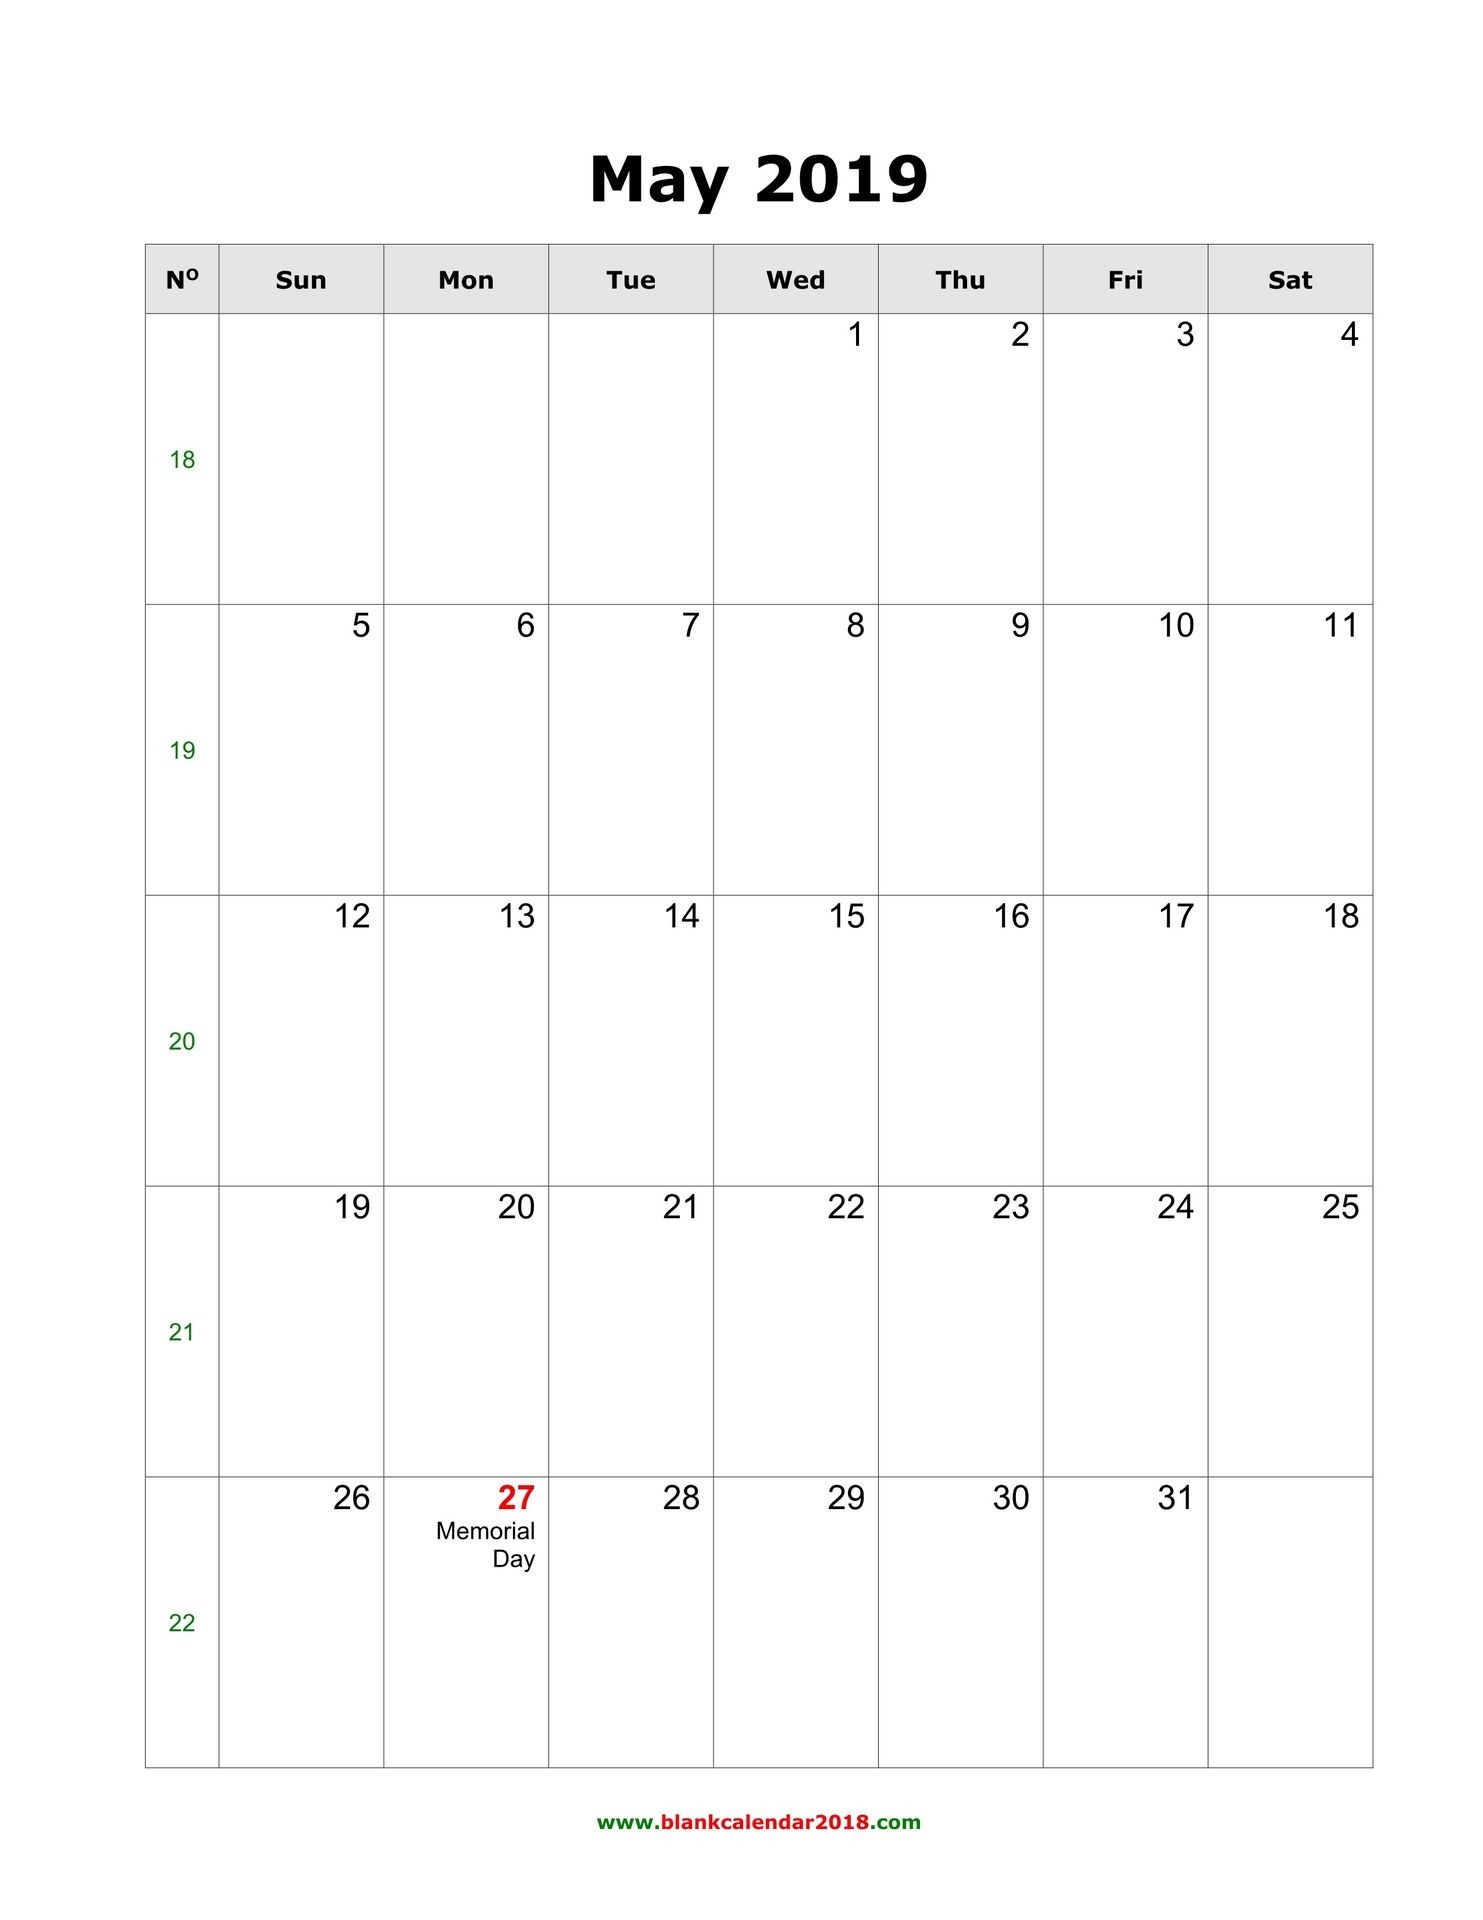 May 2019 Calendar With Holidays Philippines | Excel Calendar